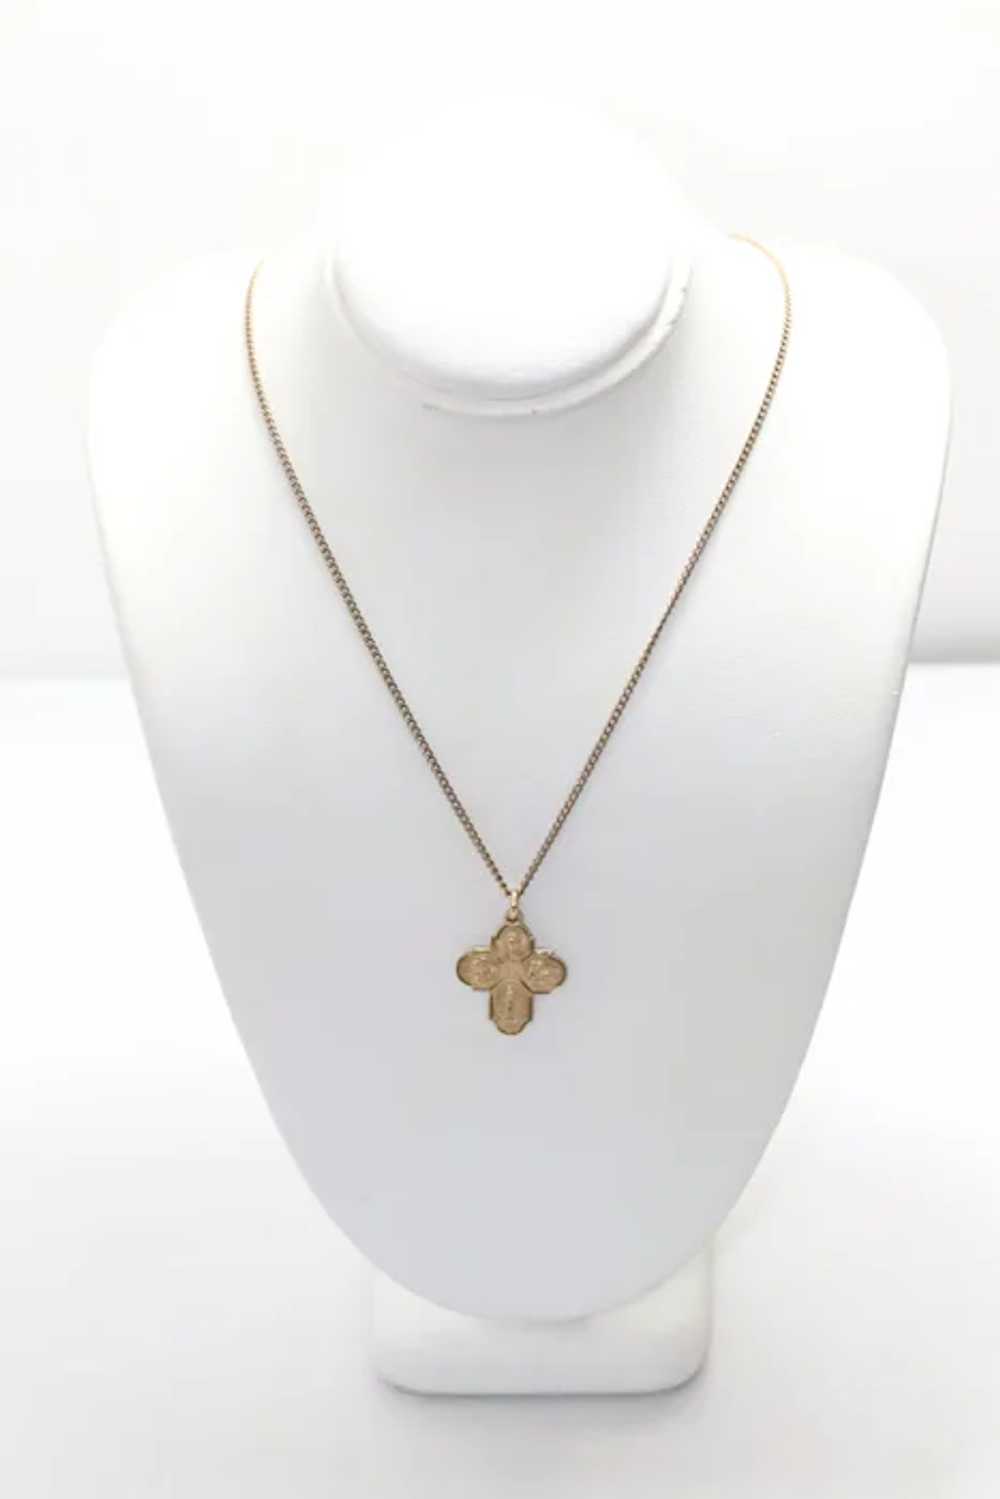 14 KT Gold Filled Religious Necklace - image 2